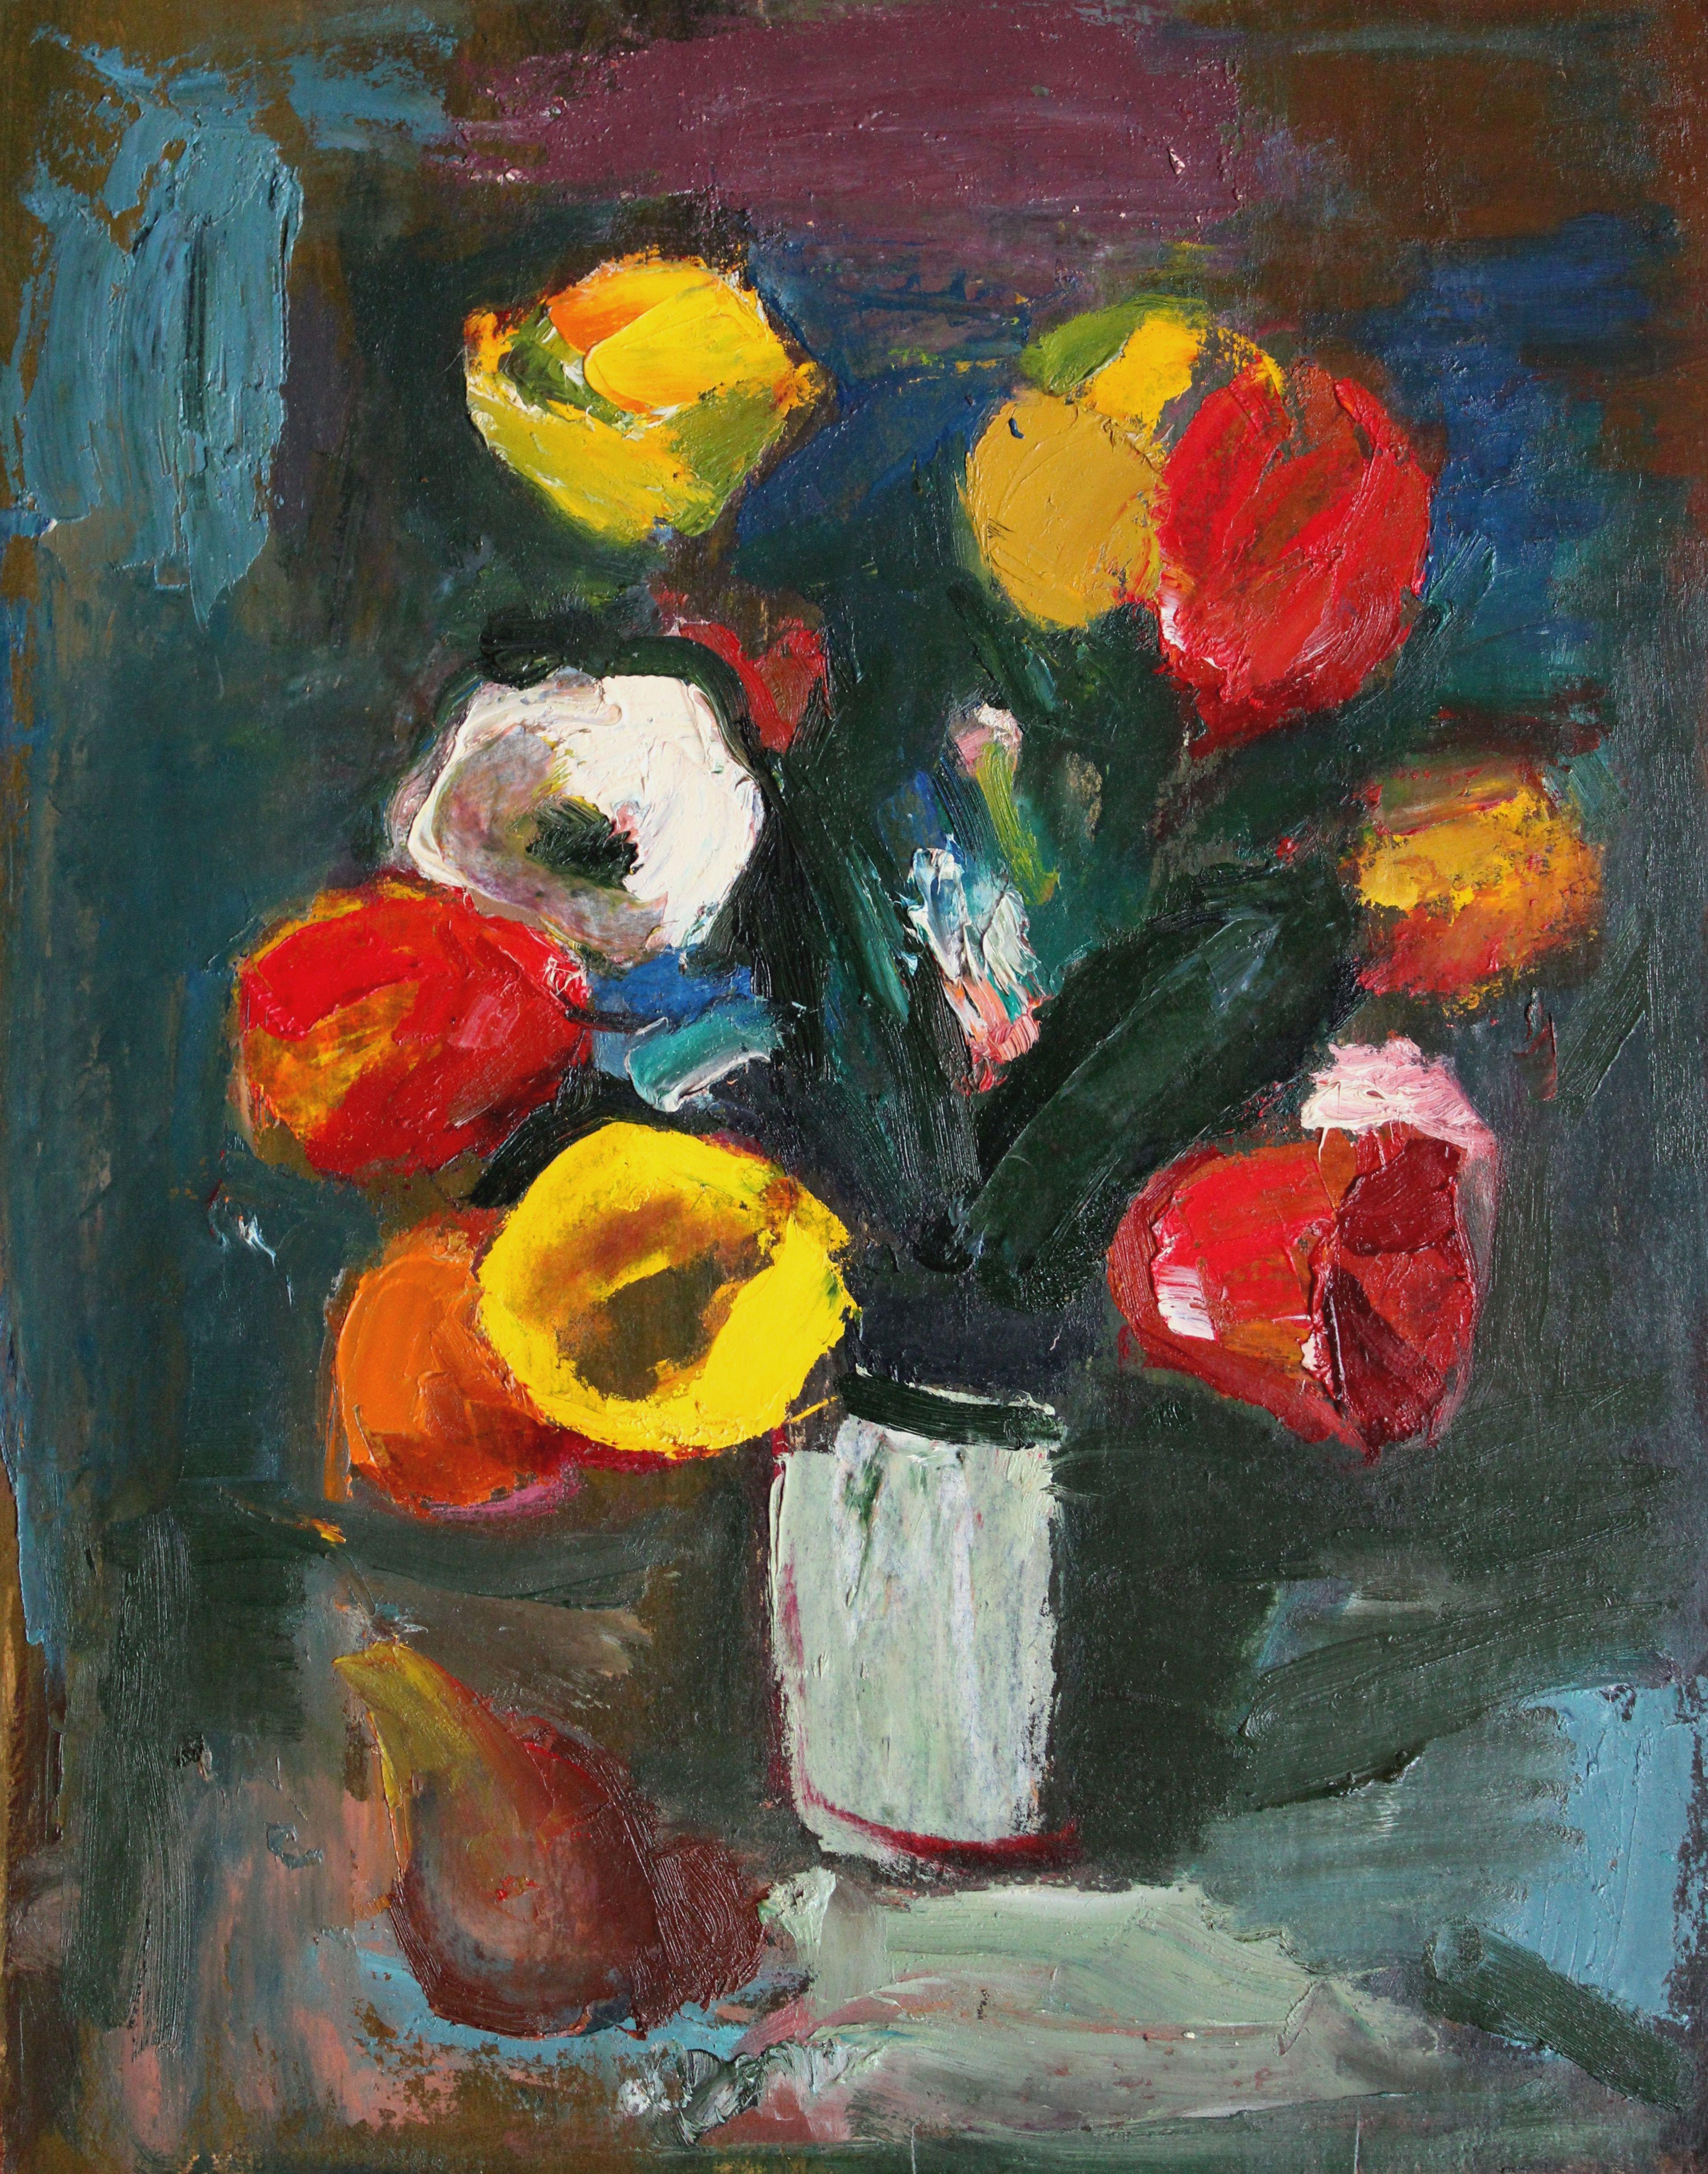 Aleksandr Rodin Abstract Painting - Tulips with pear. Oil on cardboard, 50x40 cm